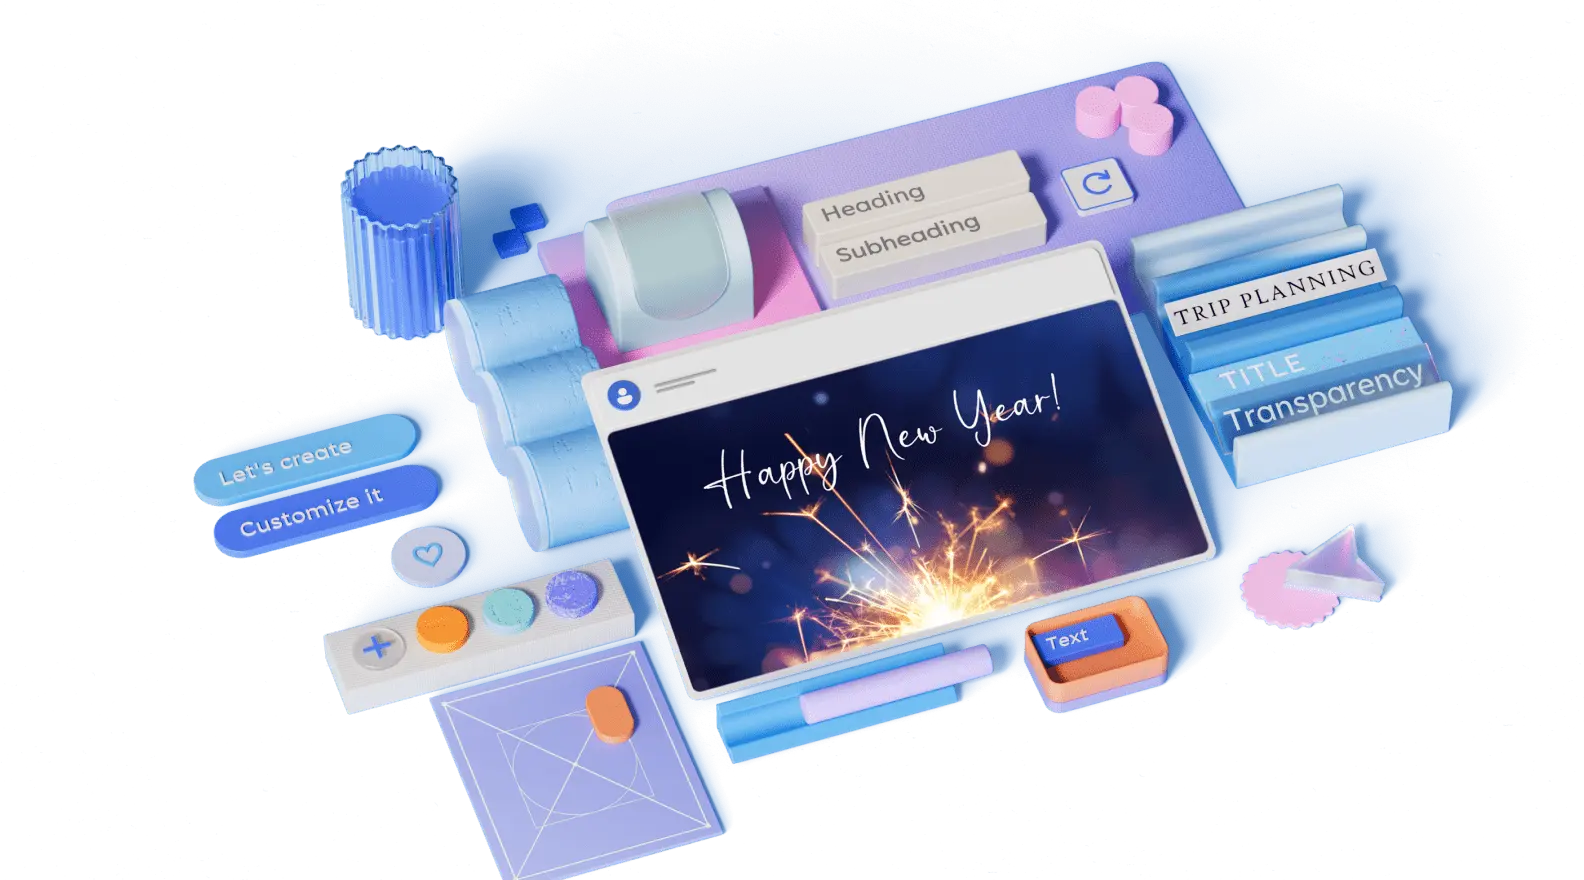 Happy New Year fireworks template surrounded by 3D design elements